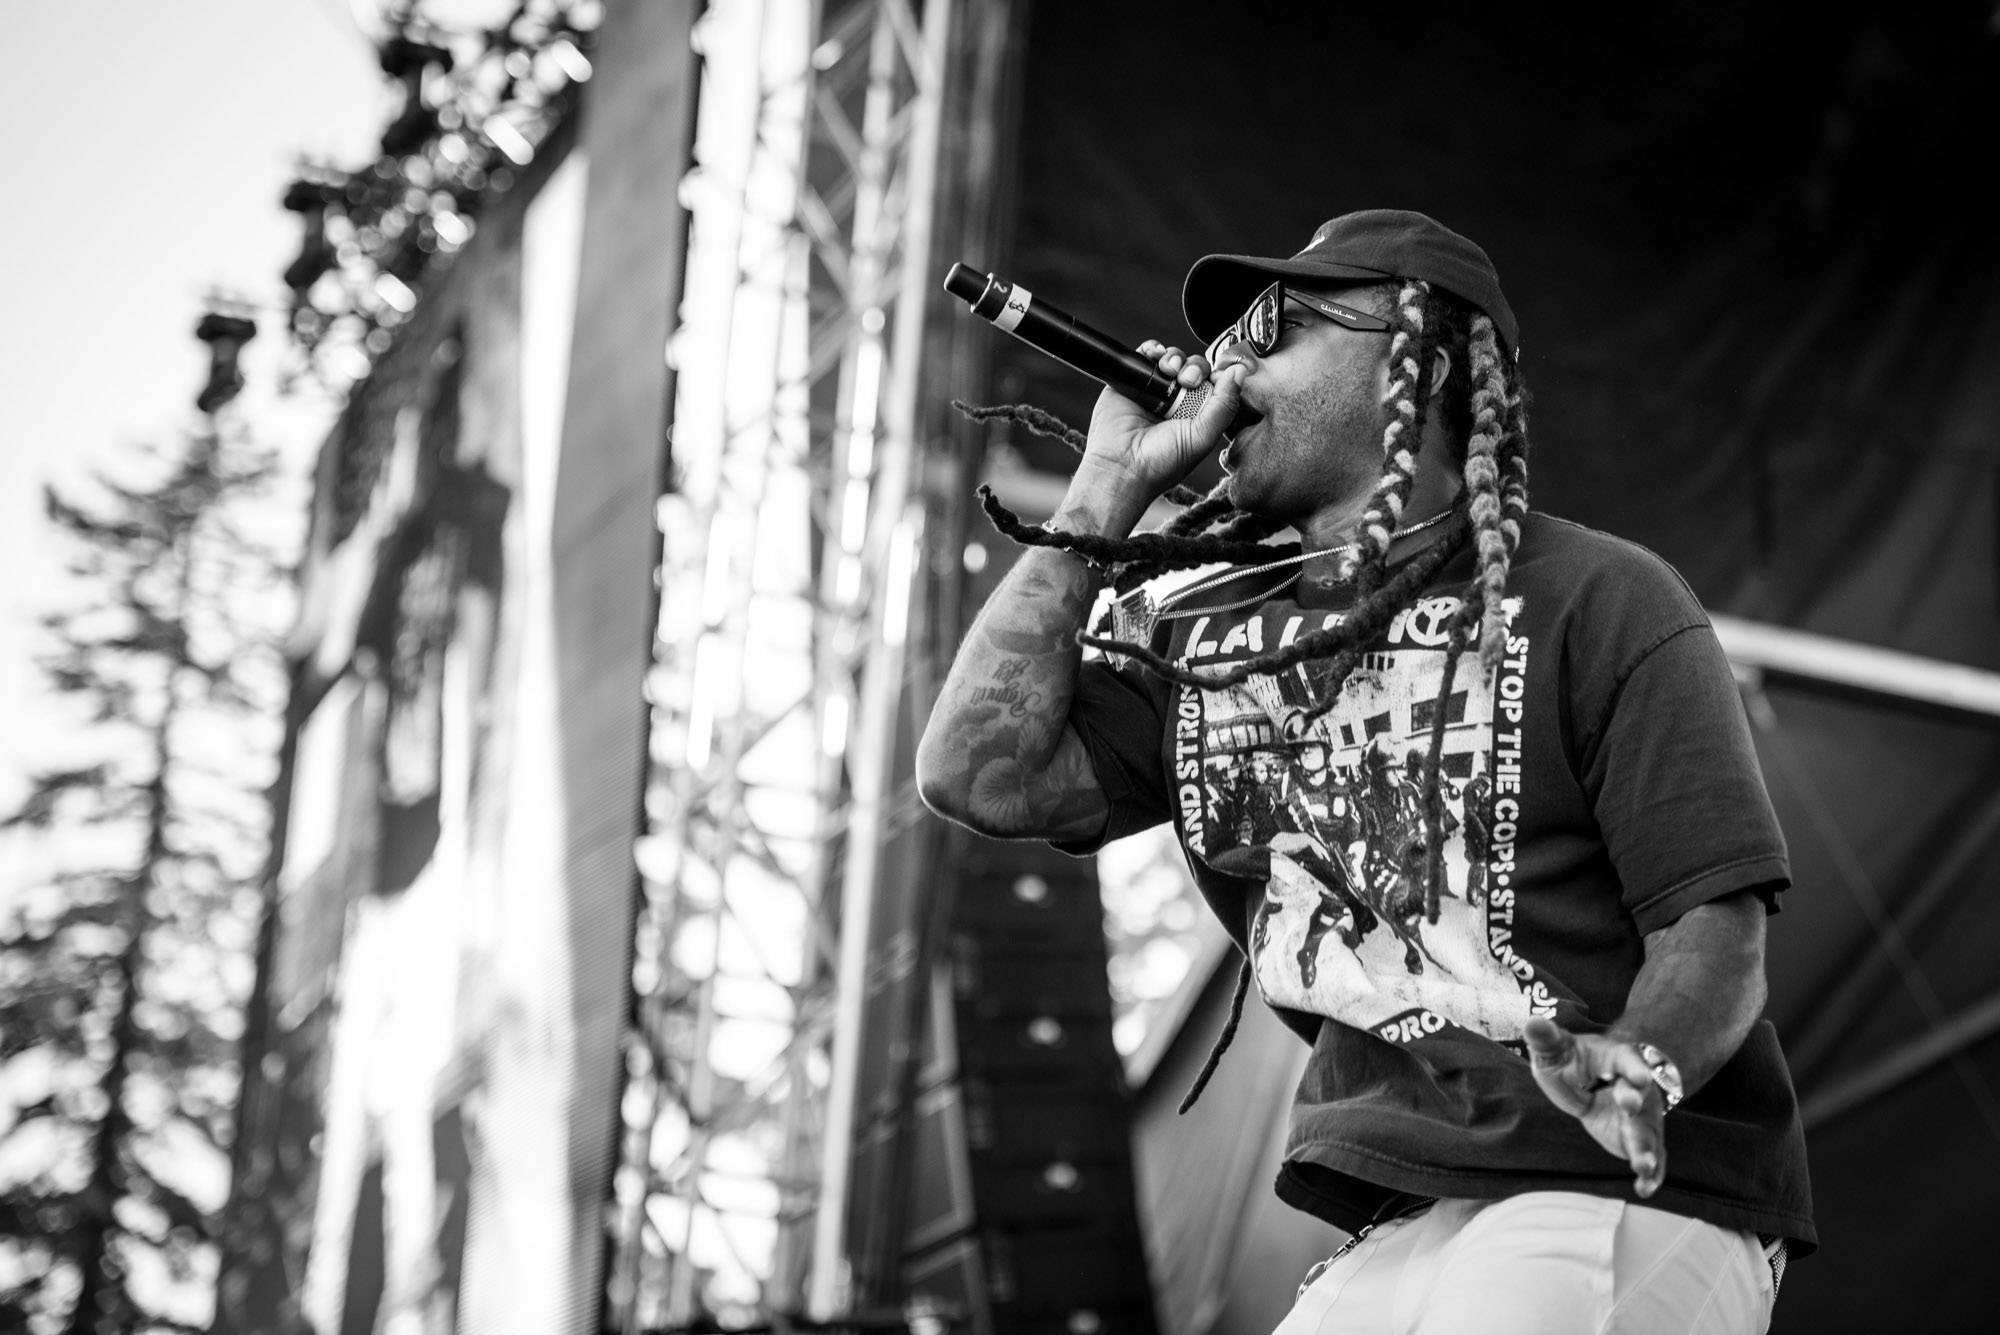 Ty Dolla $ign at Fvded in the Park, Surrey, July 7 2017. Jason Martin photo.